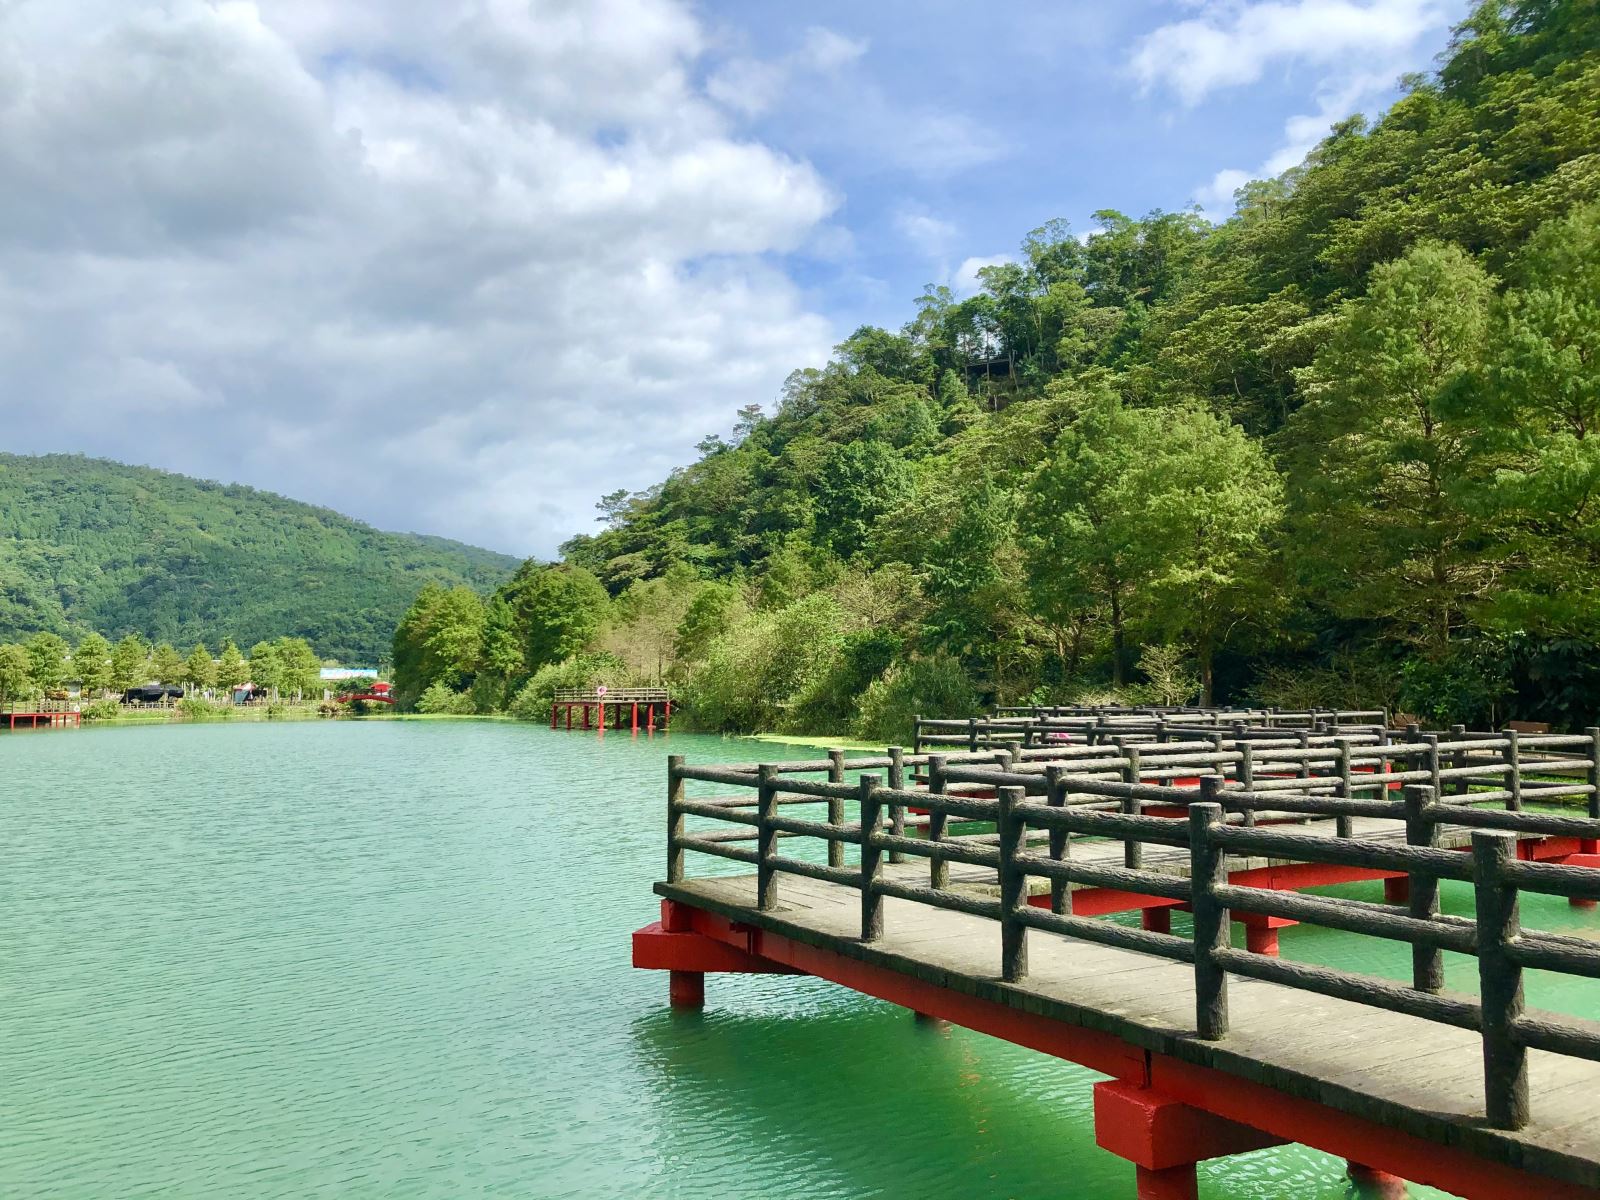 The Jiuqu Bridge at "Wanglongpi", a holy place for enjoying the tongs, allows visitors to walk into the lake.